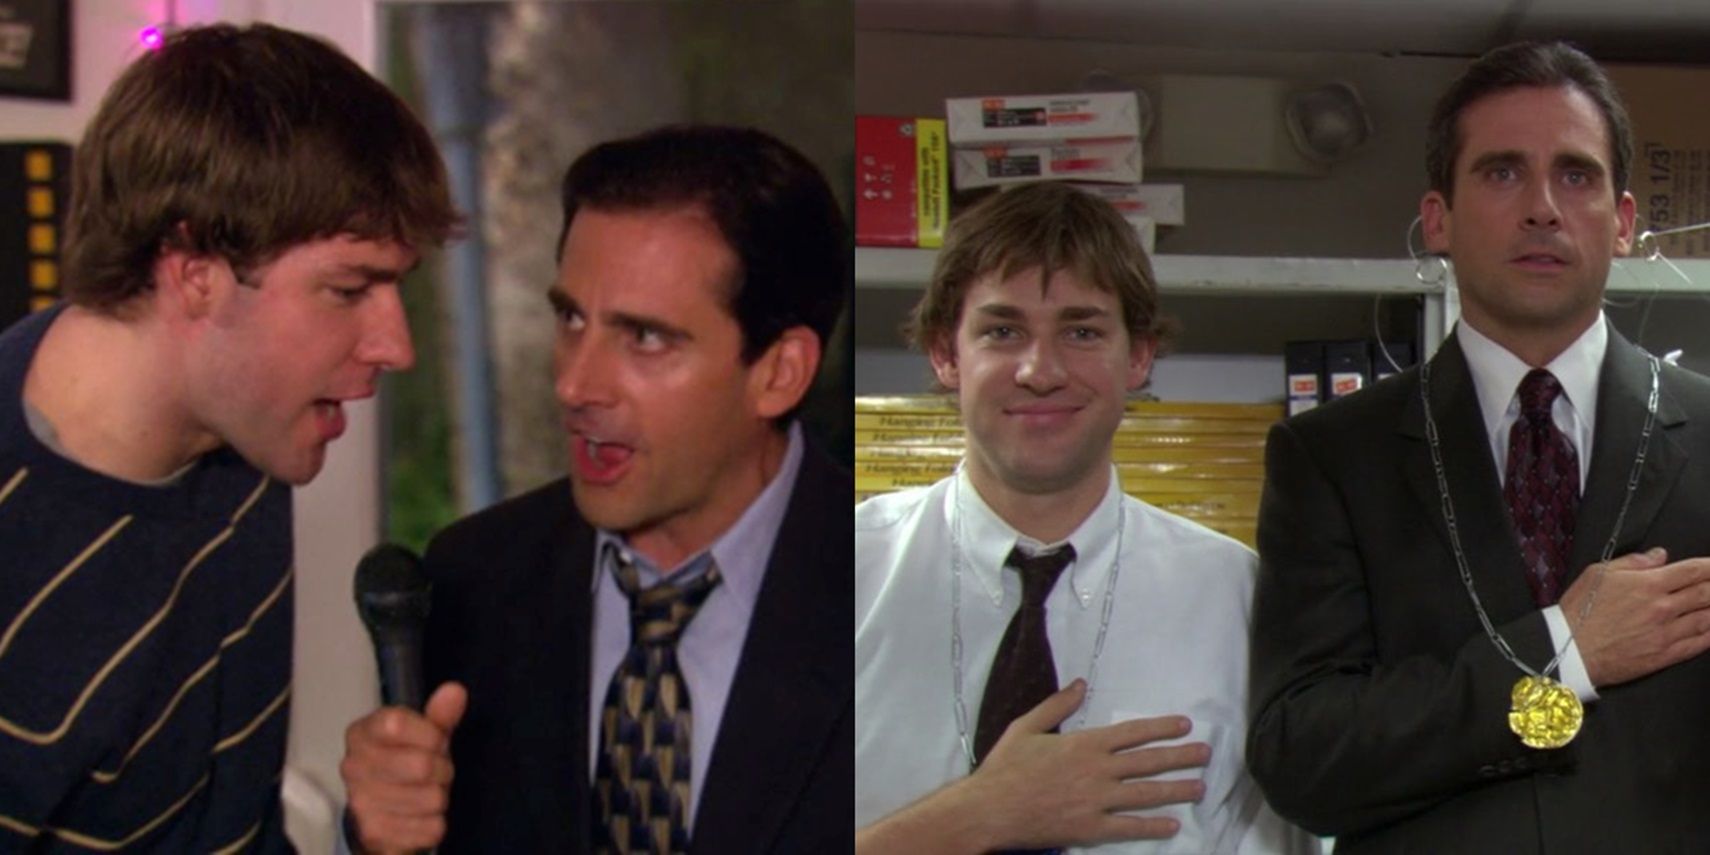 Jim and Michael in The Office